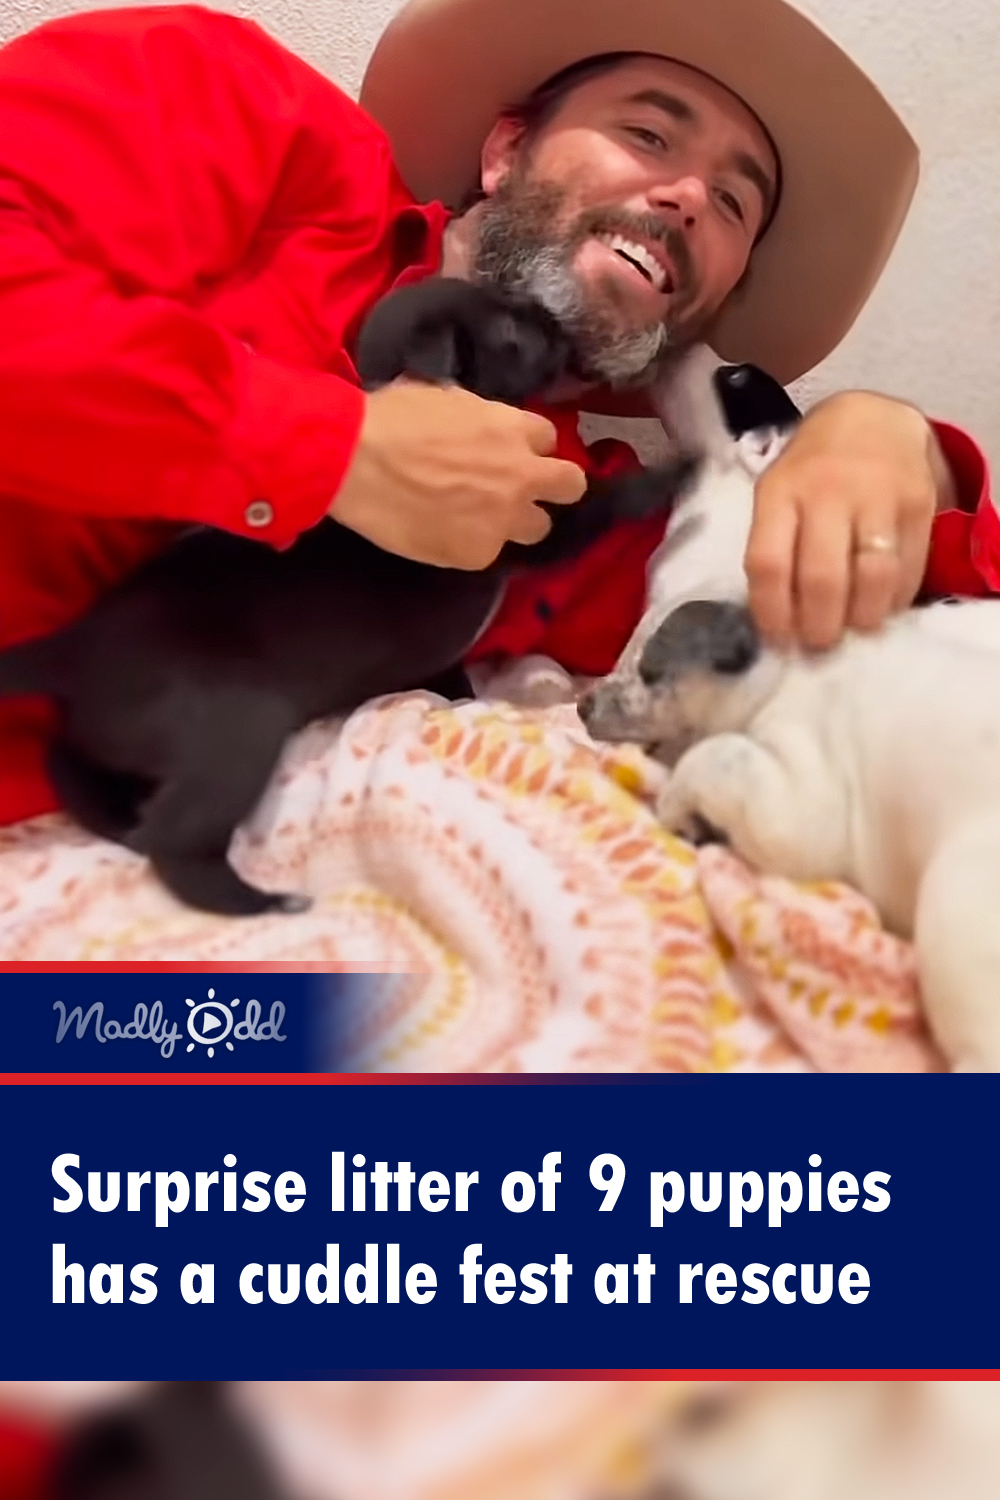 Surprise litter of 9 puppies has a cuddle fest at rescue